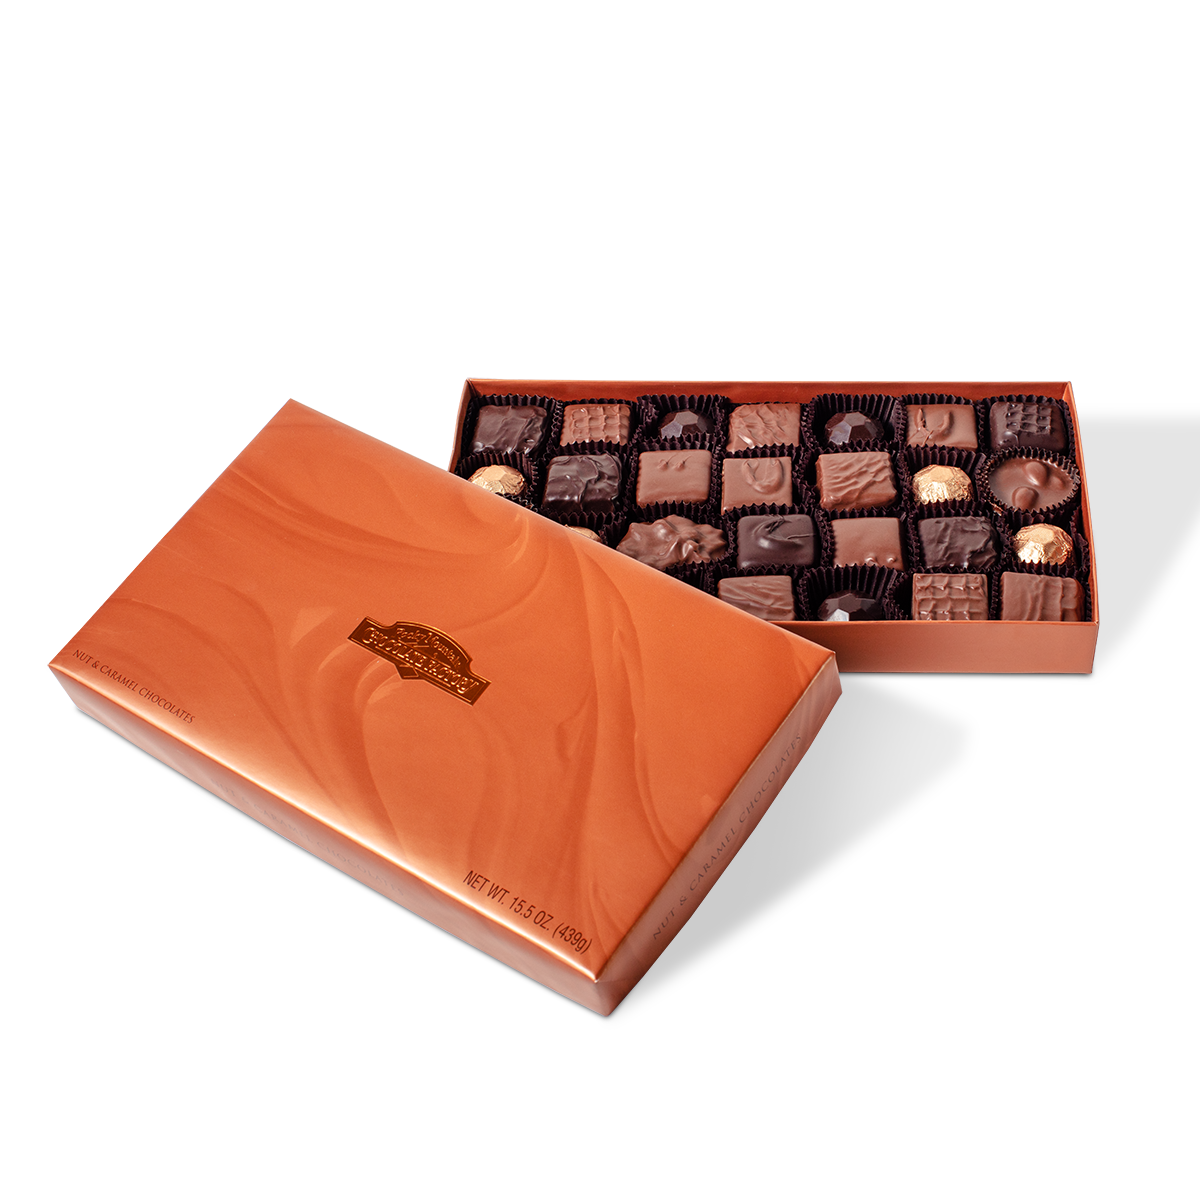 Nut and Caramel Chocolates Gift Box 15.5 oz - rmcfshop